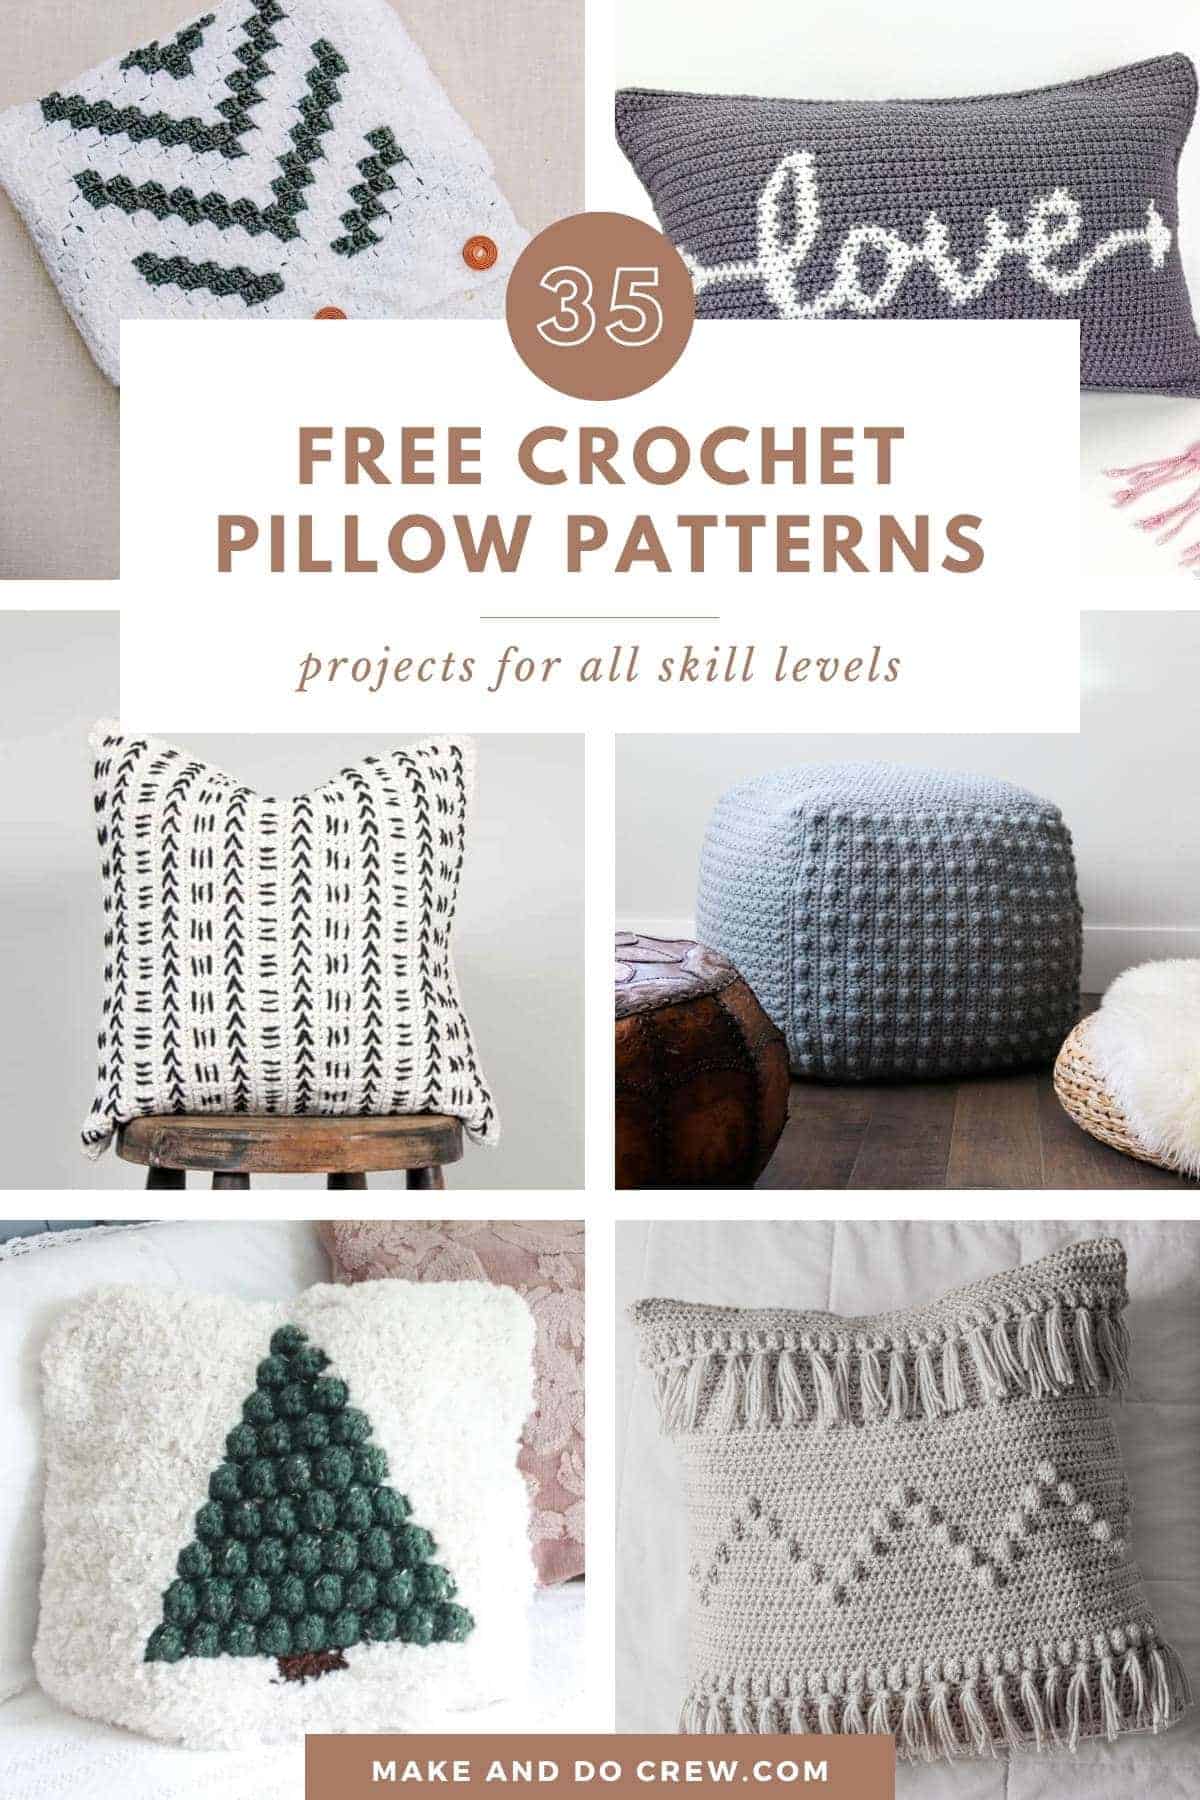 Collection of free crochet pillow patterns for all skill levels.